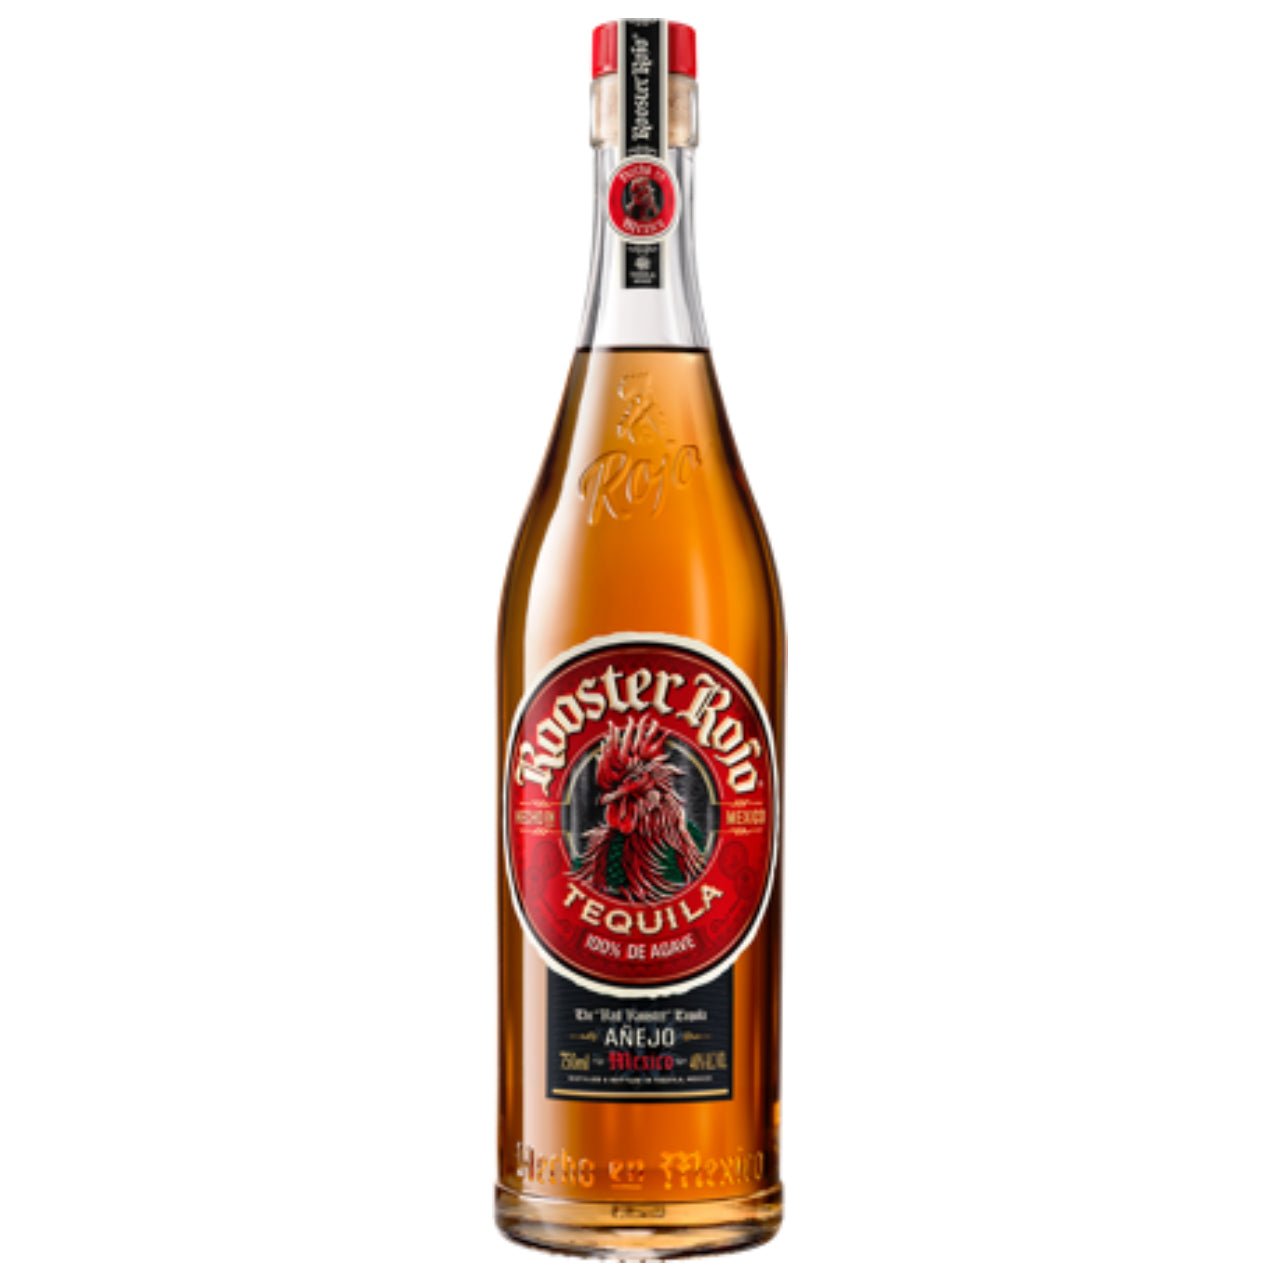 Rooster Rojo Tequila Anejo 38% 700ml - Tequila - Liquor Wine Cave